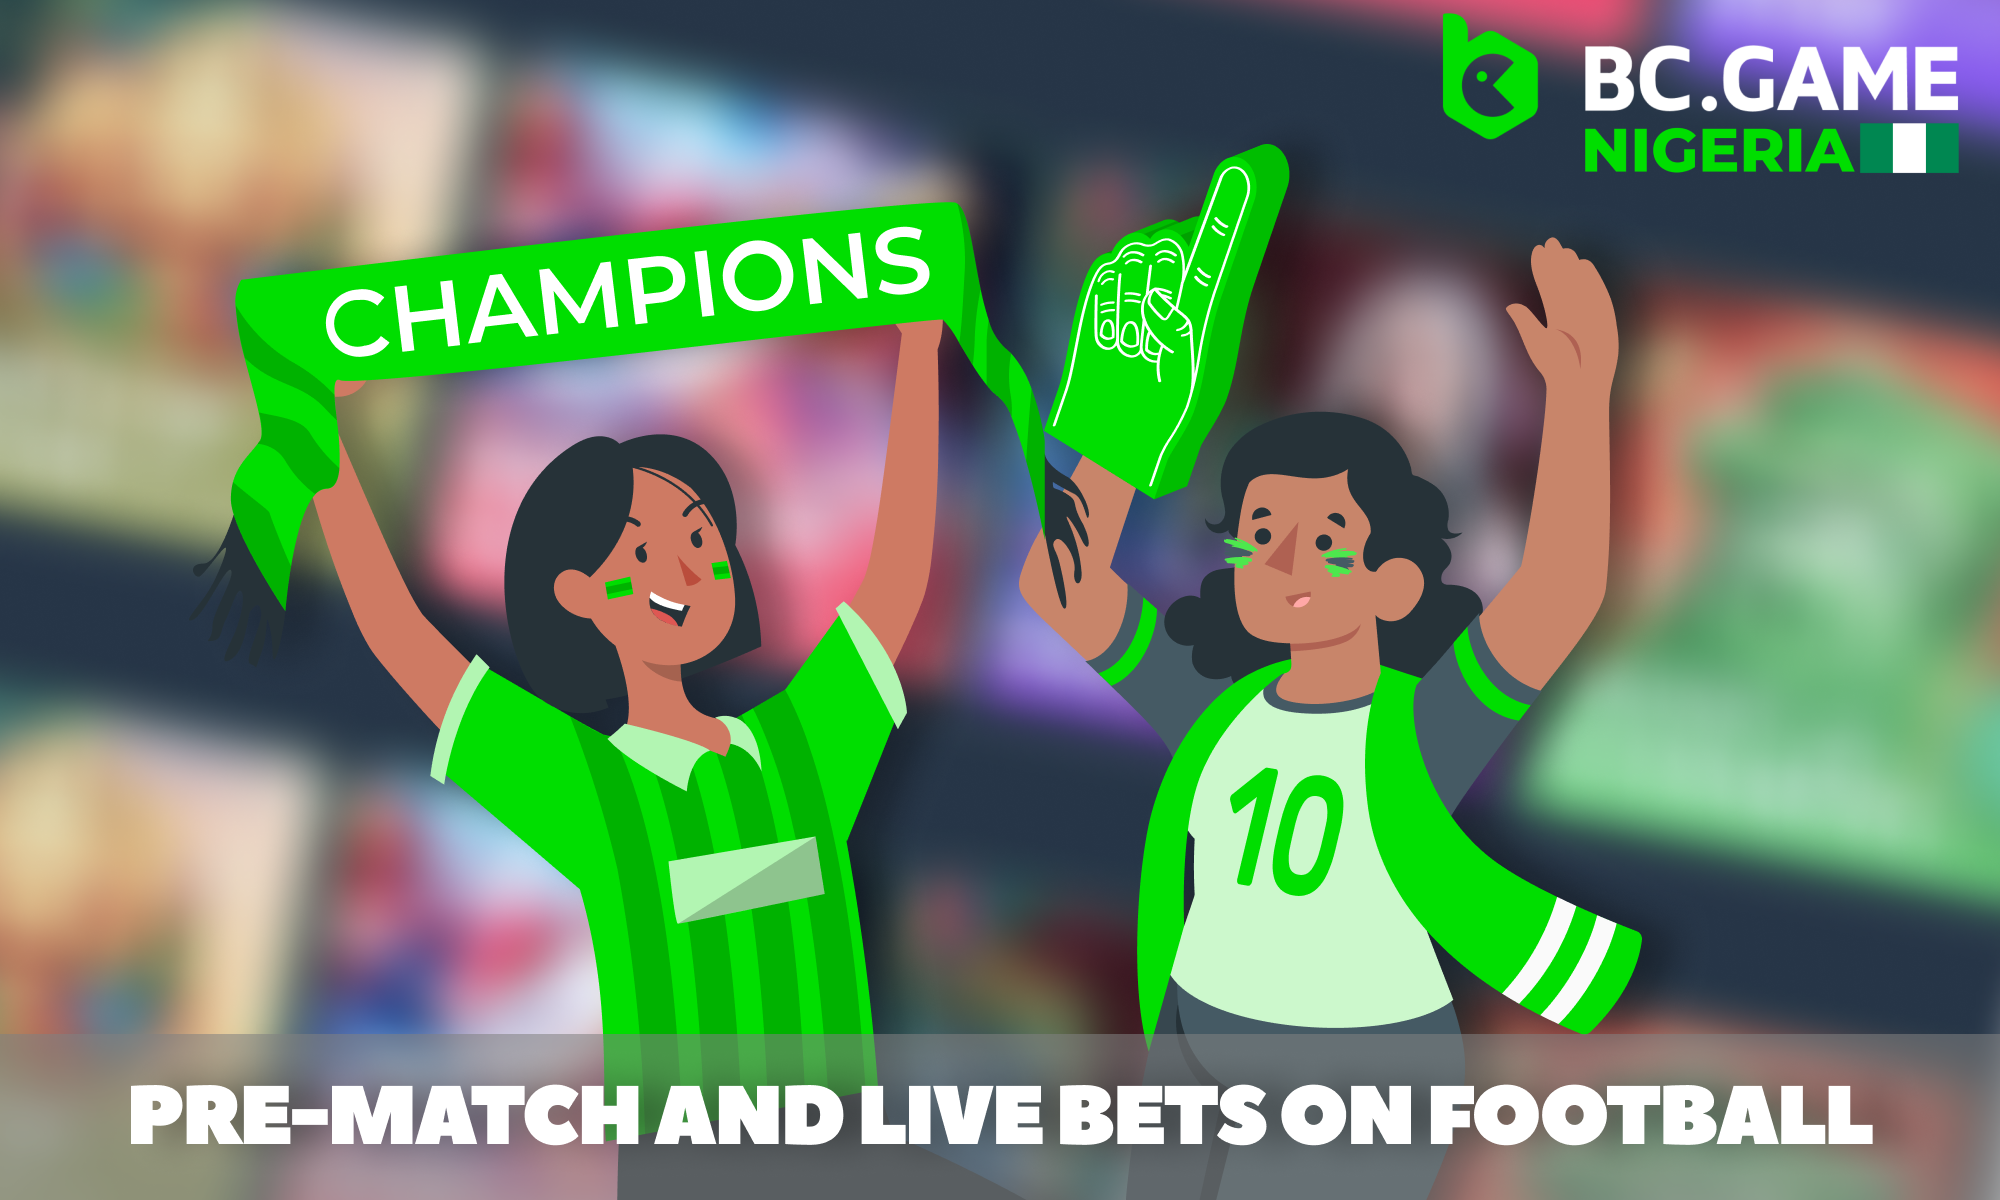 Live betting on football at the BC Game Nigeria site